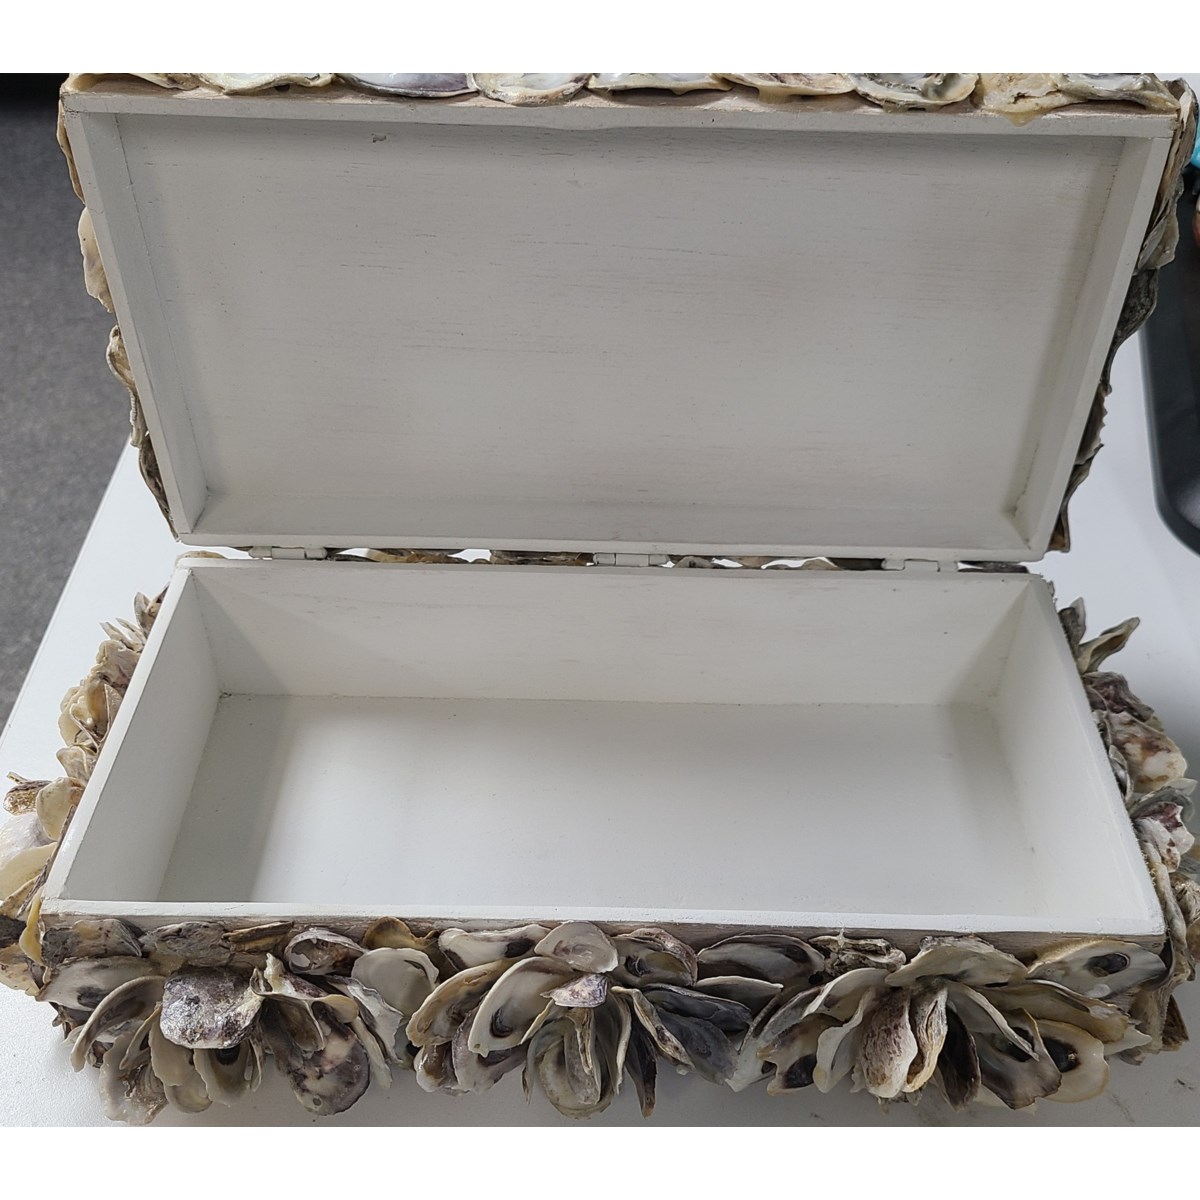 OYSTER SHELL BOXES